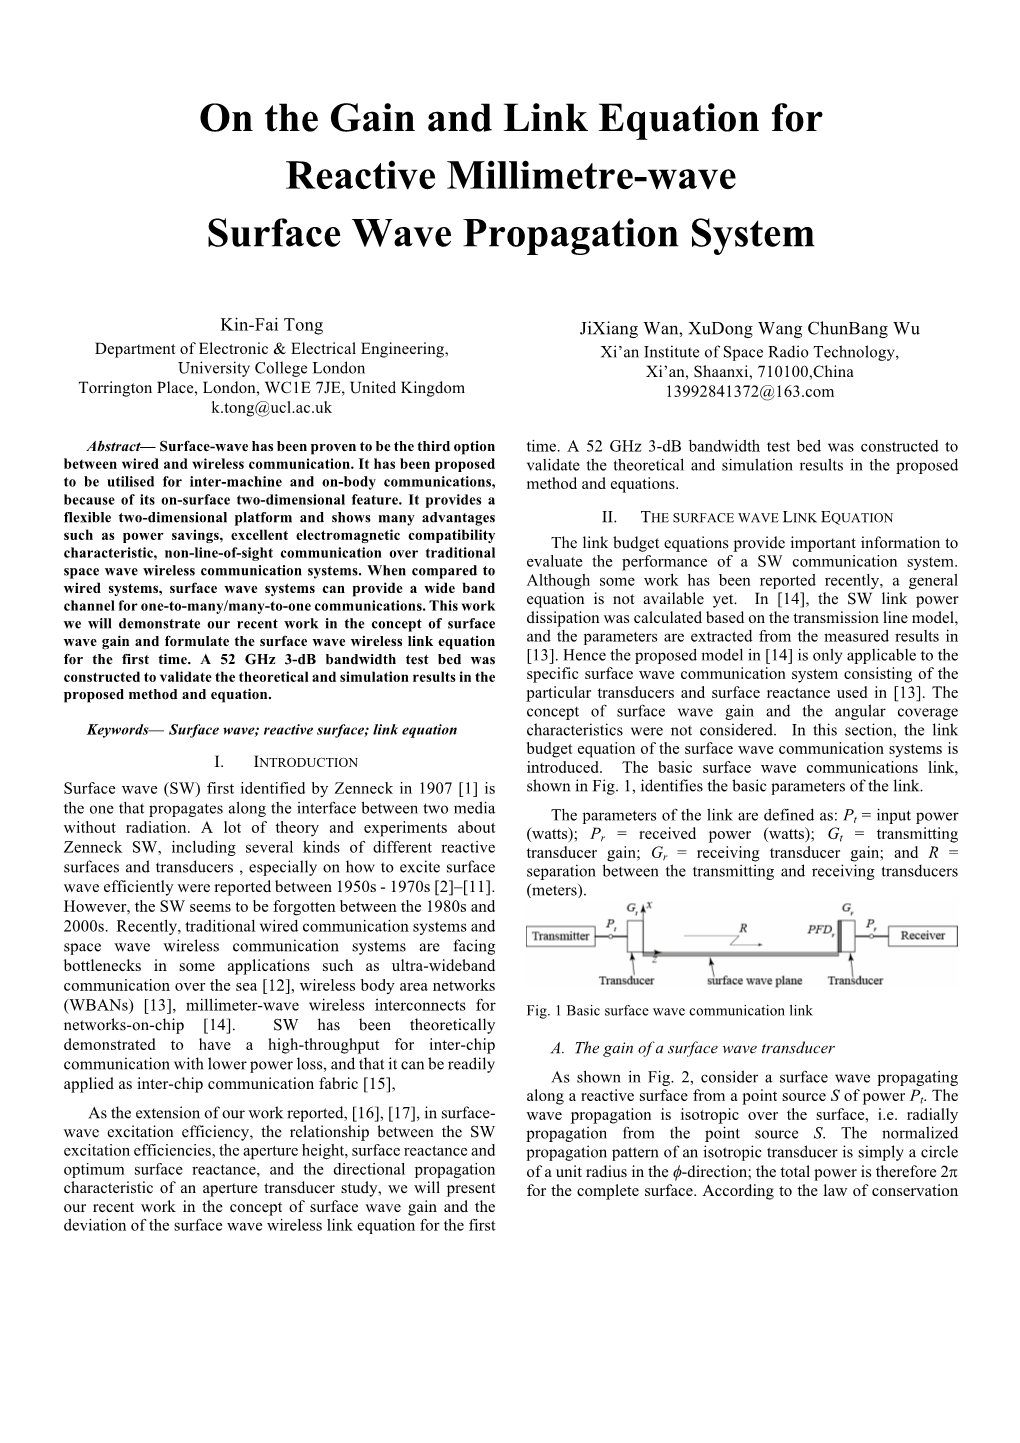 On the Gain and Link Equation for Reactive Millimetre-Wave Surface Wave Propagation System